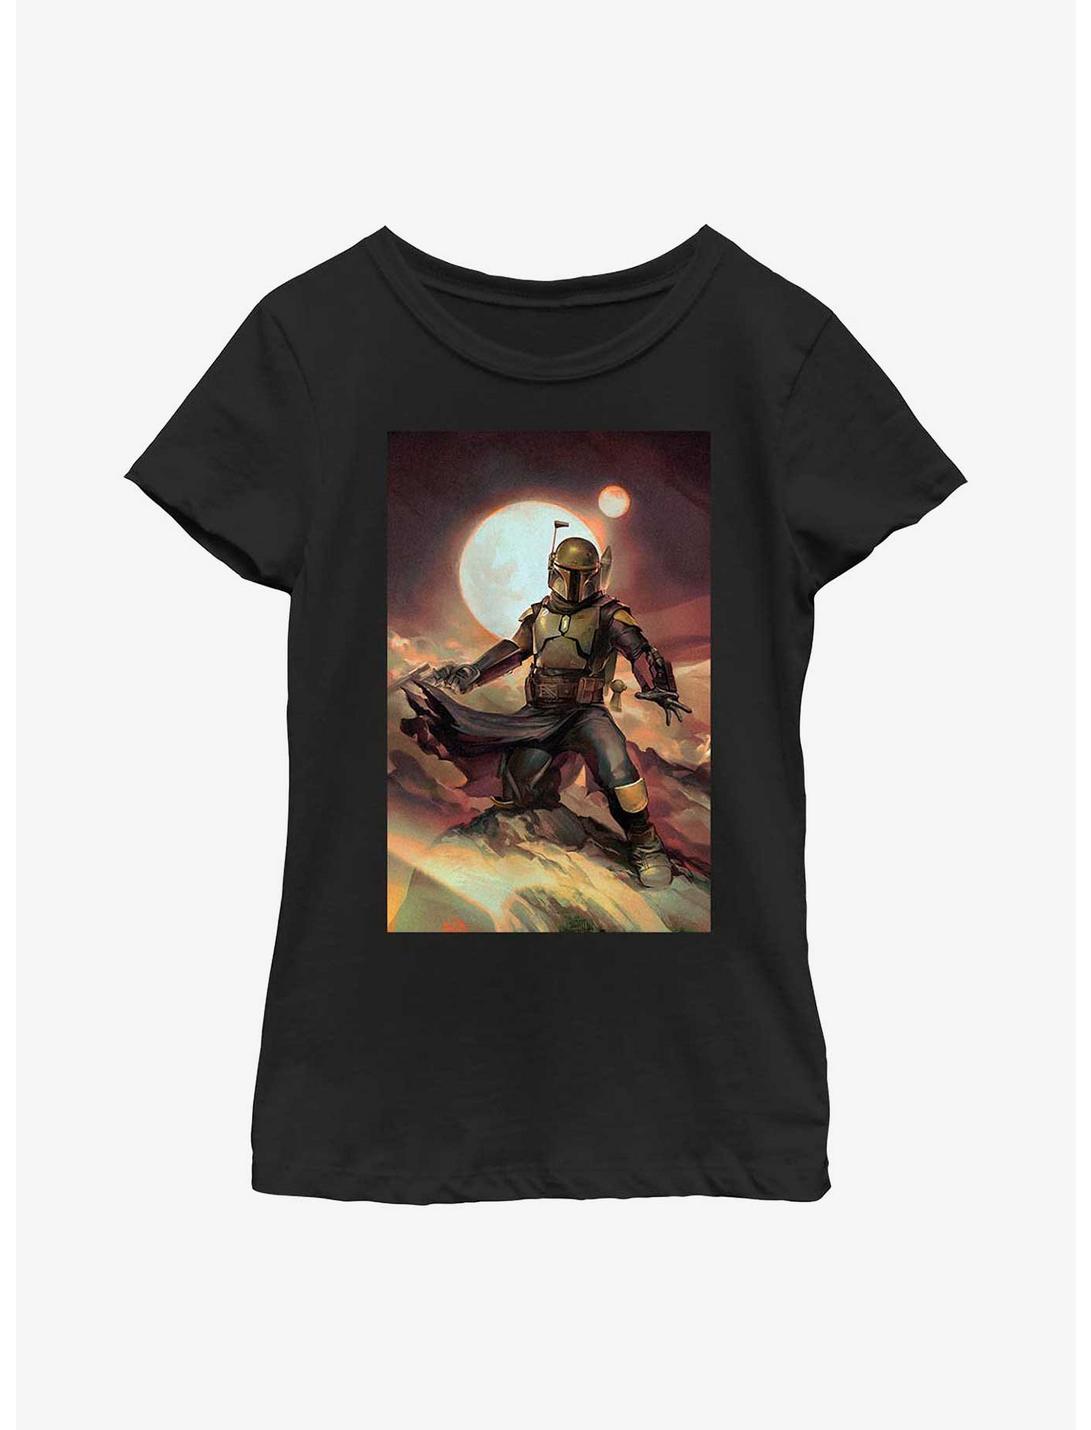 Star Wars: The Book Of Boba Fett Painting Youth Girls T-Shirt, BLACK, hi-res